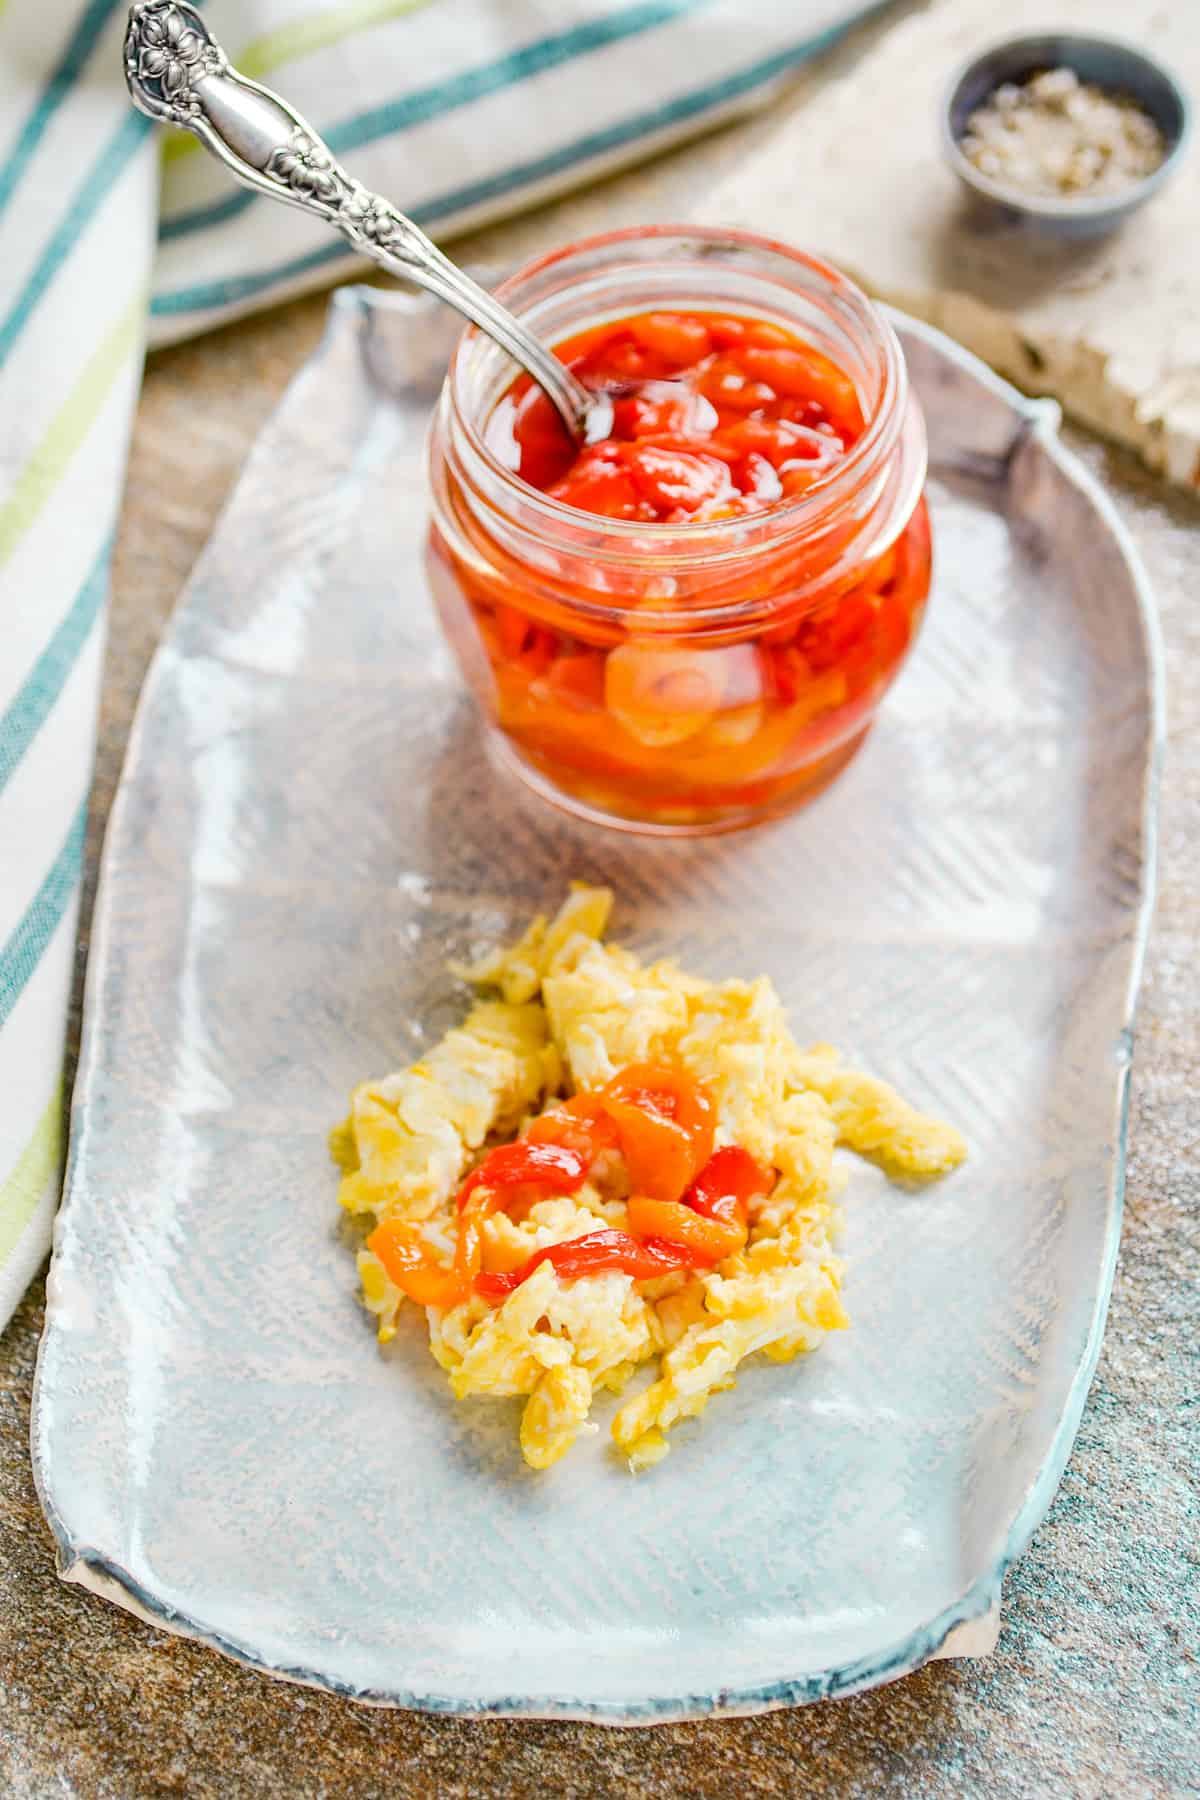 Roasted sweet peppers on scrambled eggs.